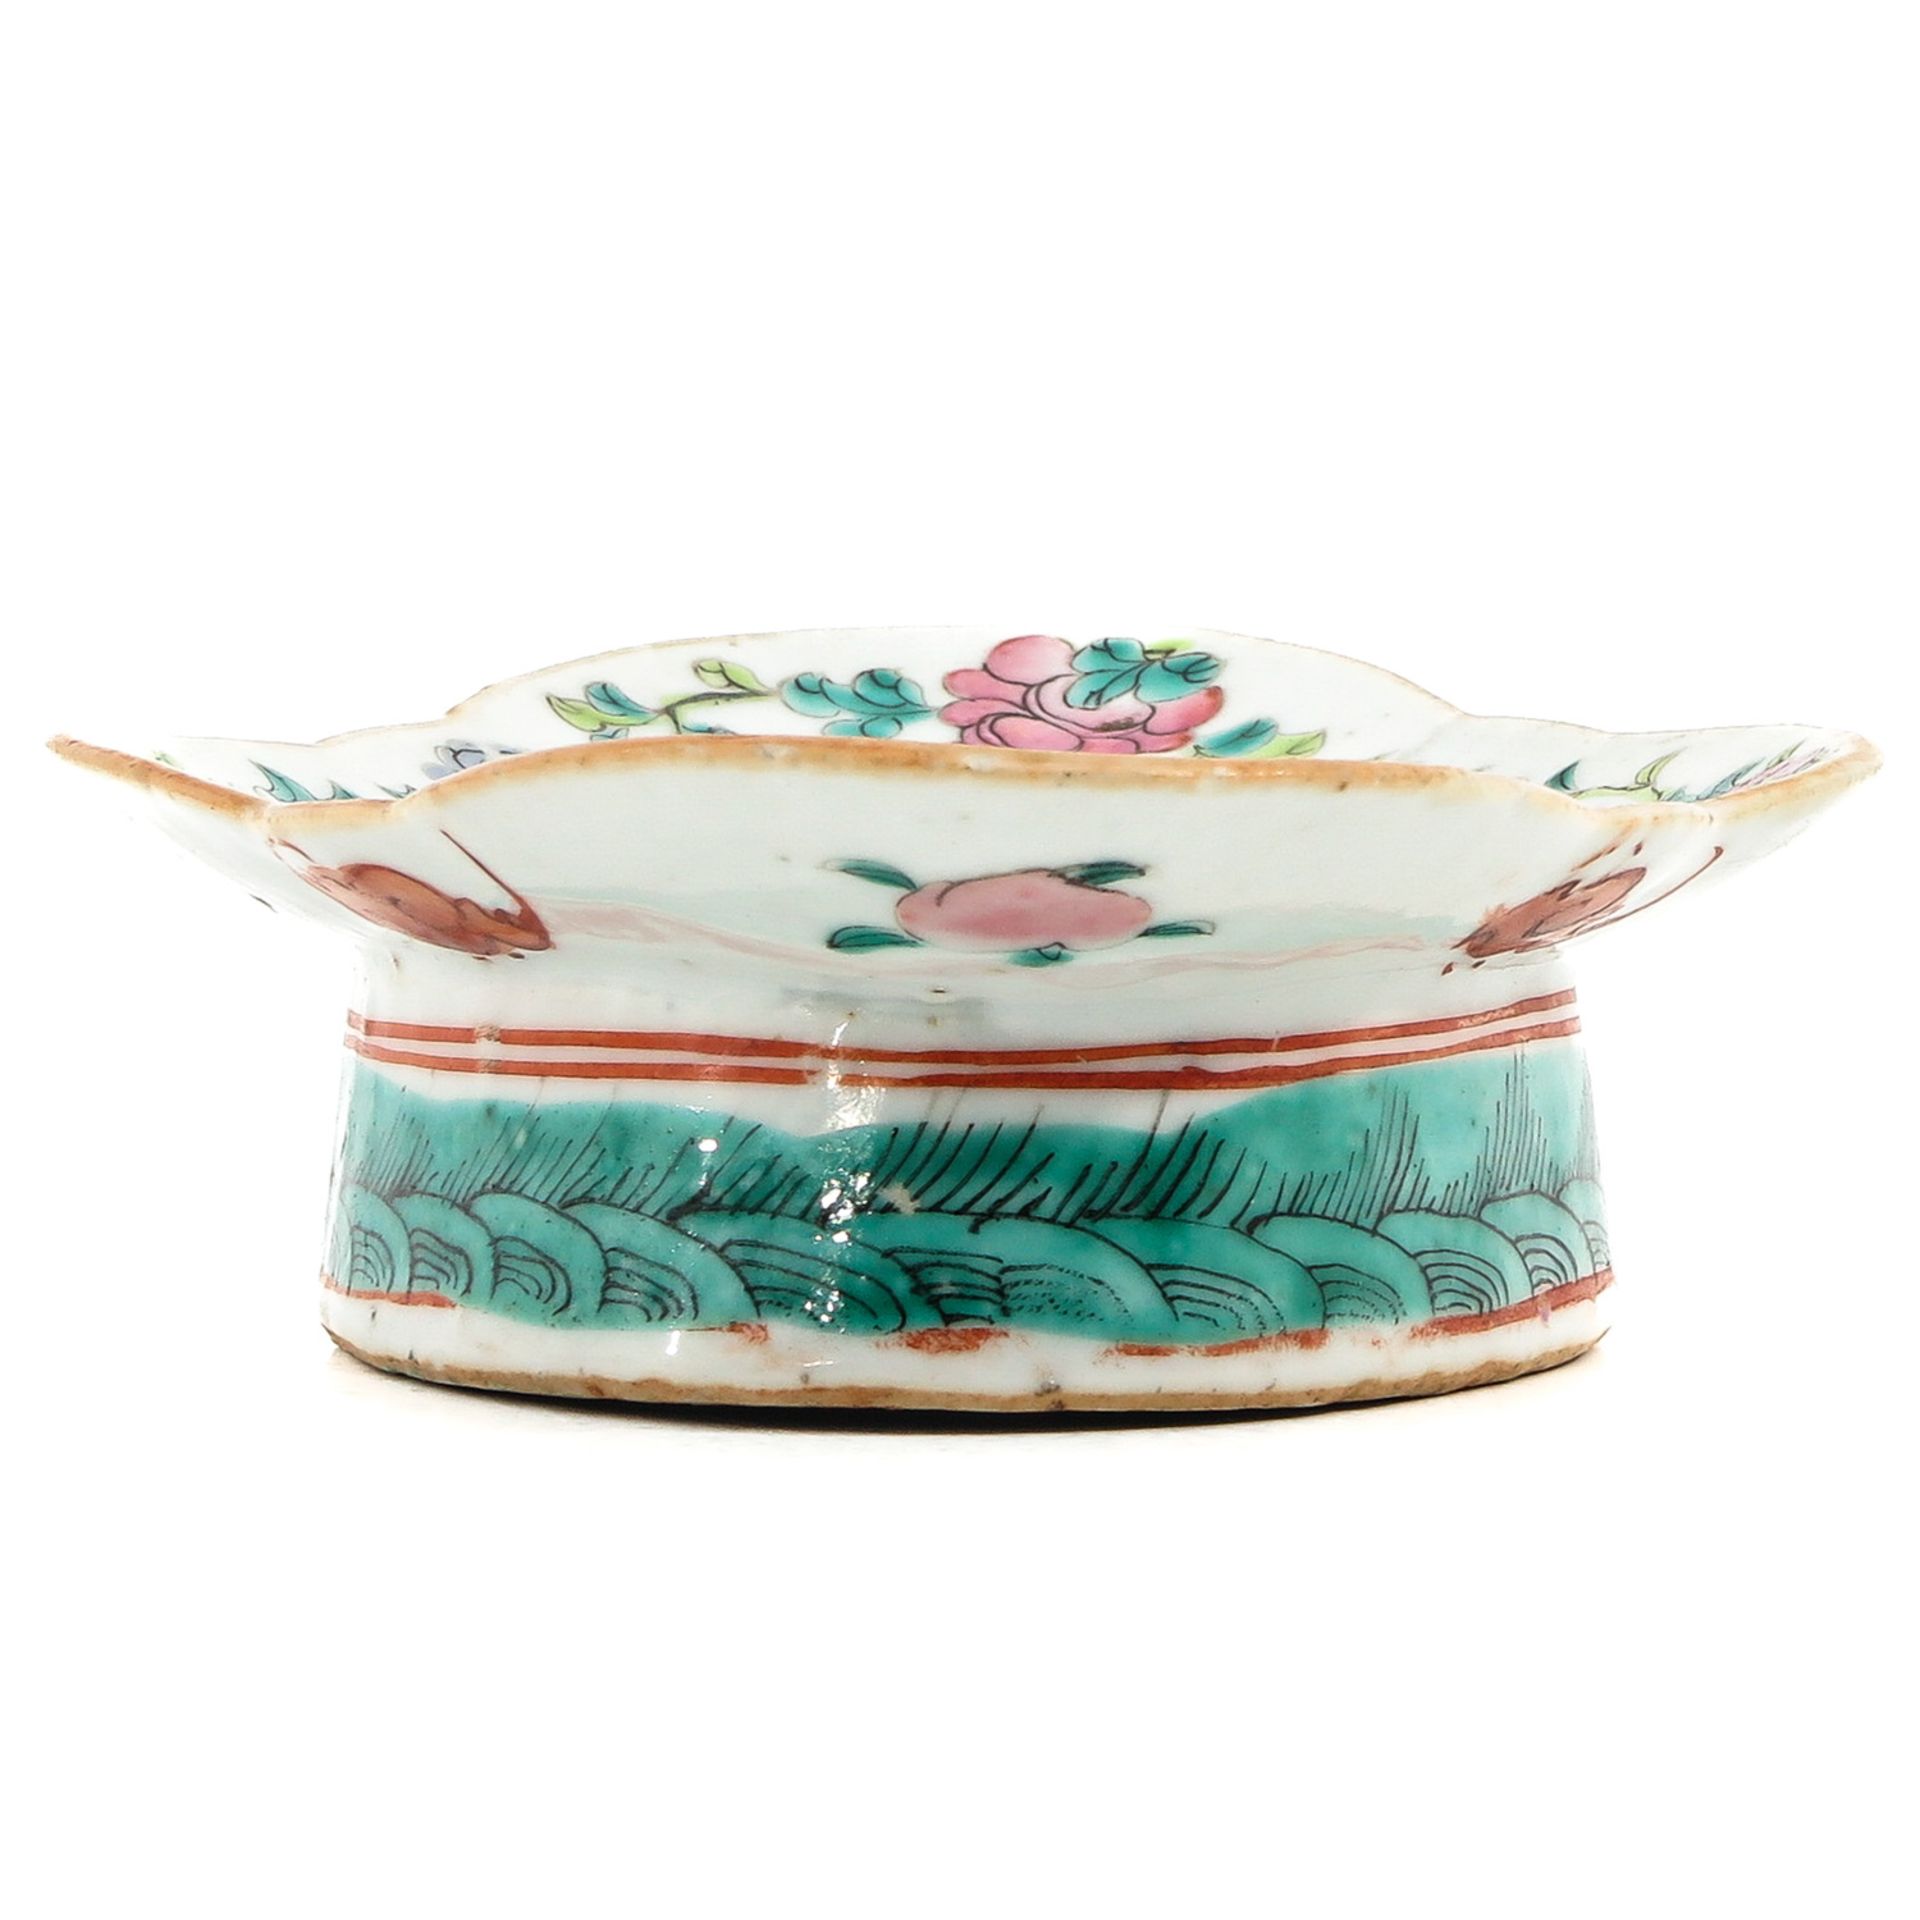 A Wu Shuang Pu Famille Rose Altar Dish - Image 4 of 9